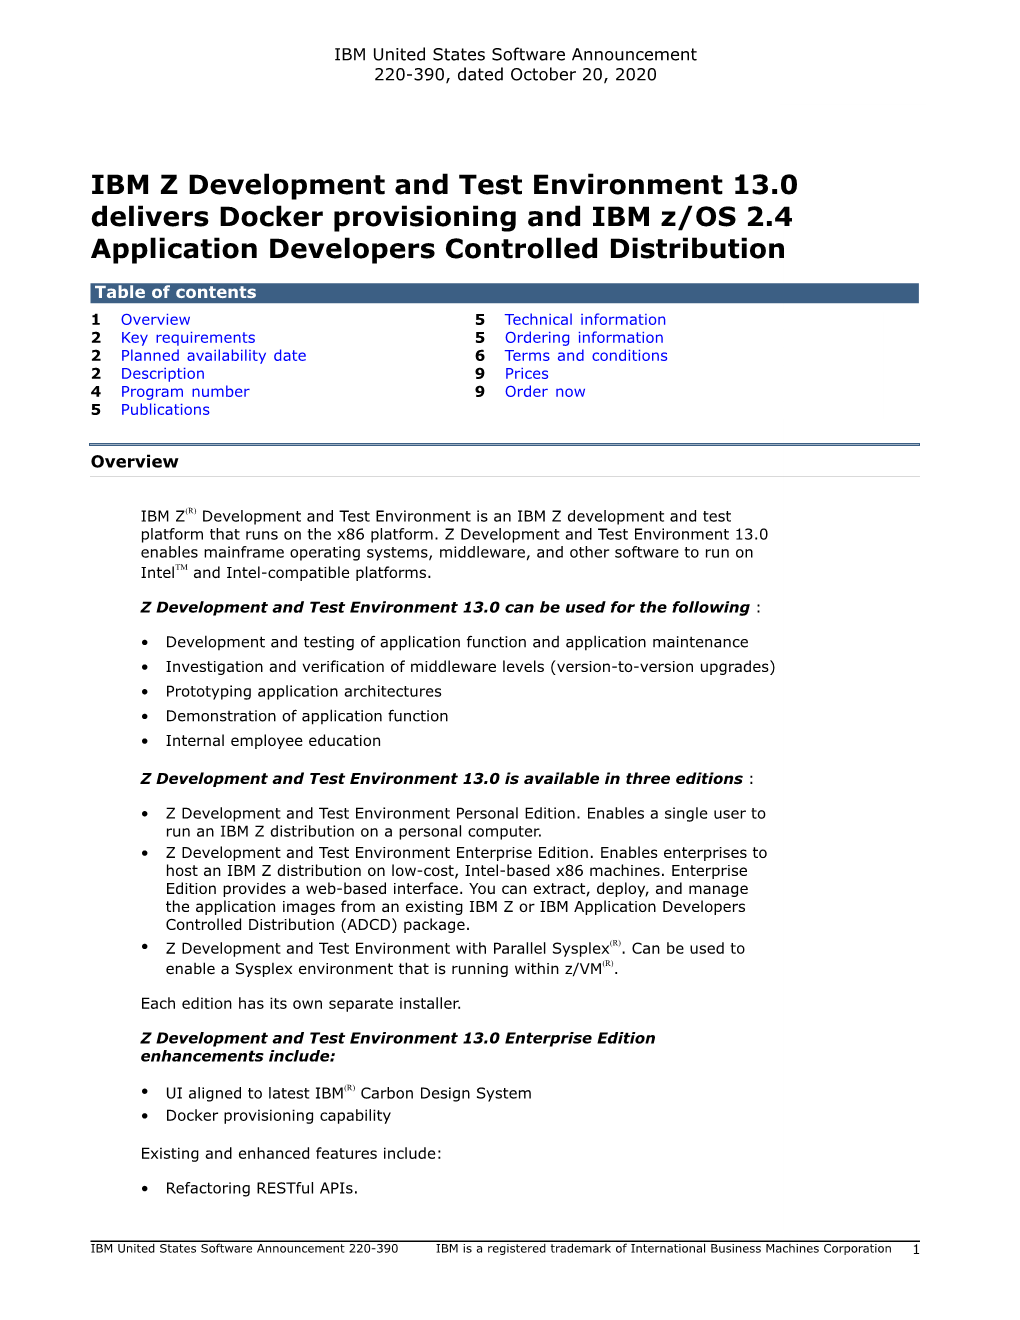 IBM Z Development and Test Environment 13.0 Delivers Docker Provisioning and IBM Z/OS 2.4 Application Developers Controlled Distribution